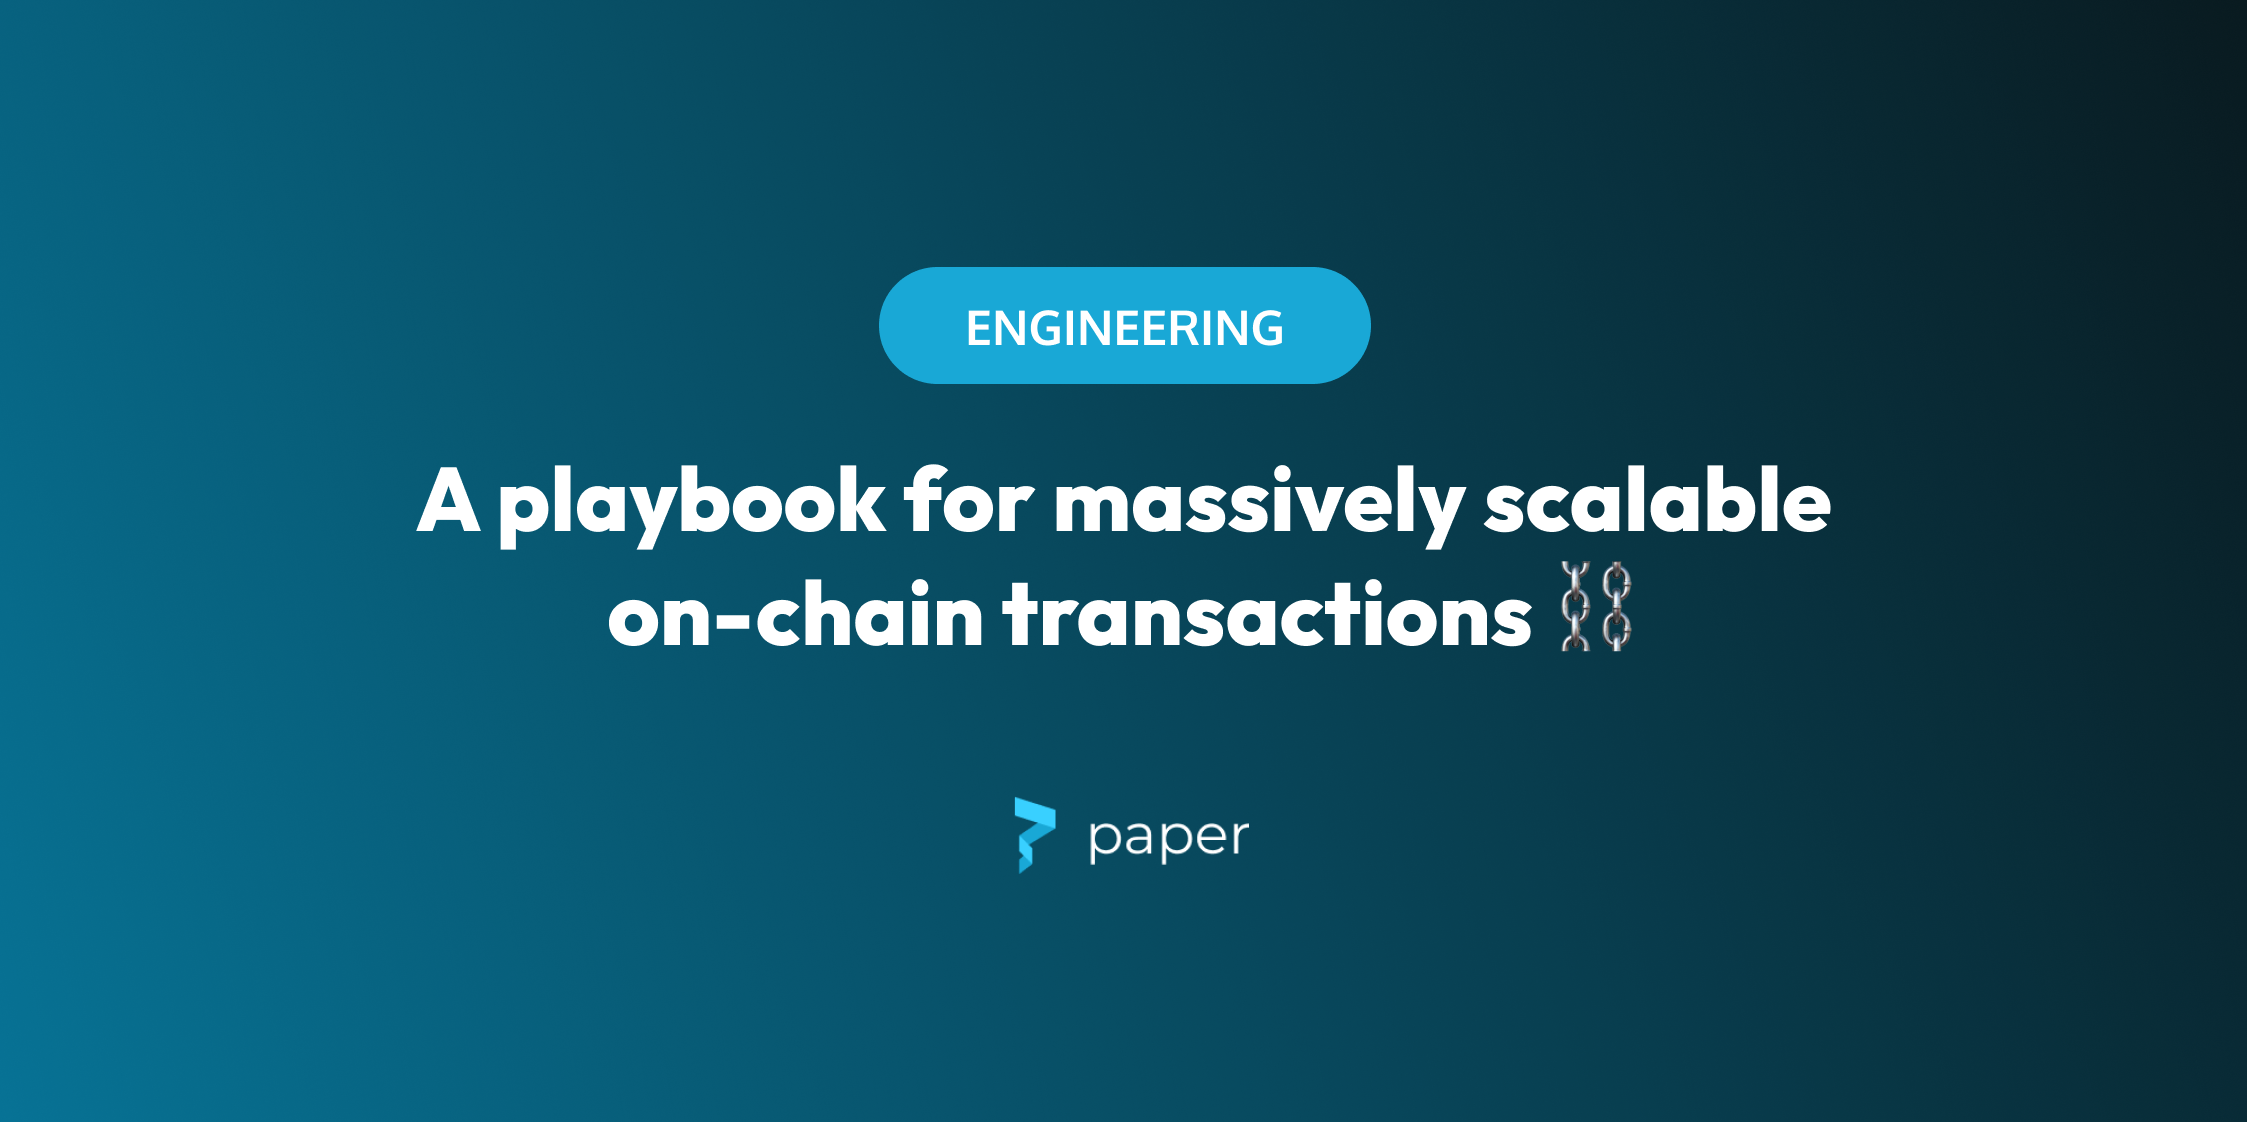 How to save users $100M in gas fees & headaches | Paper's playbook for massively scalable on-chain transactions